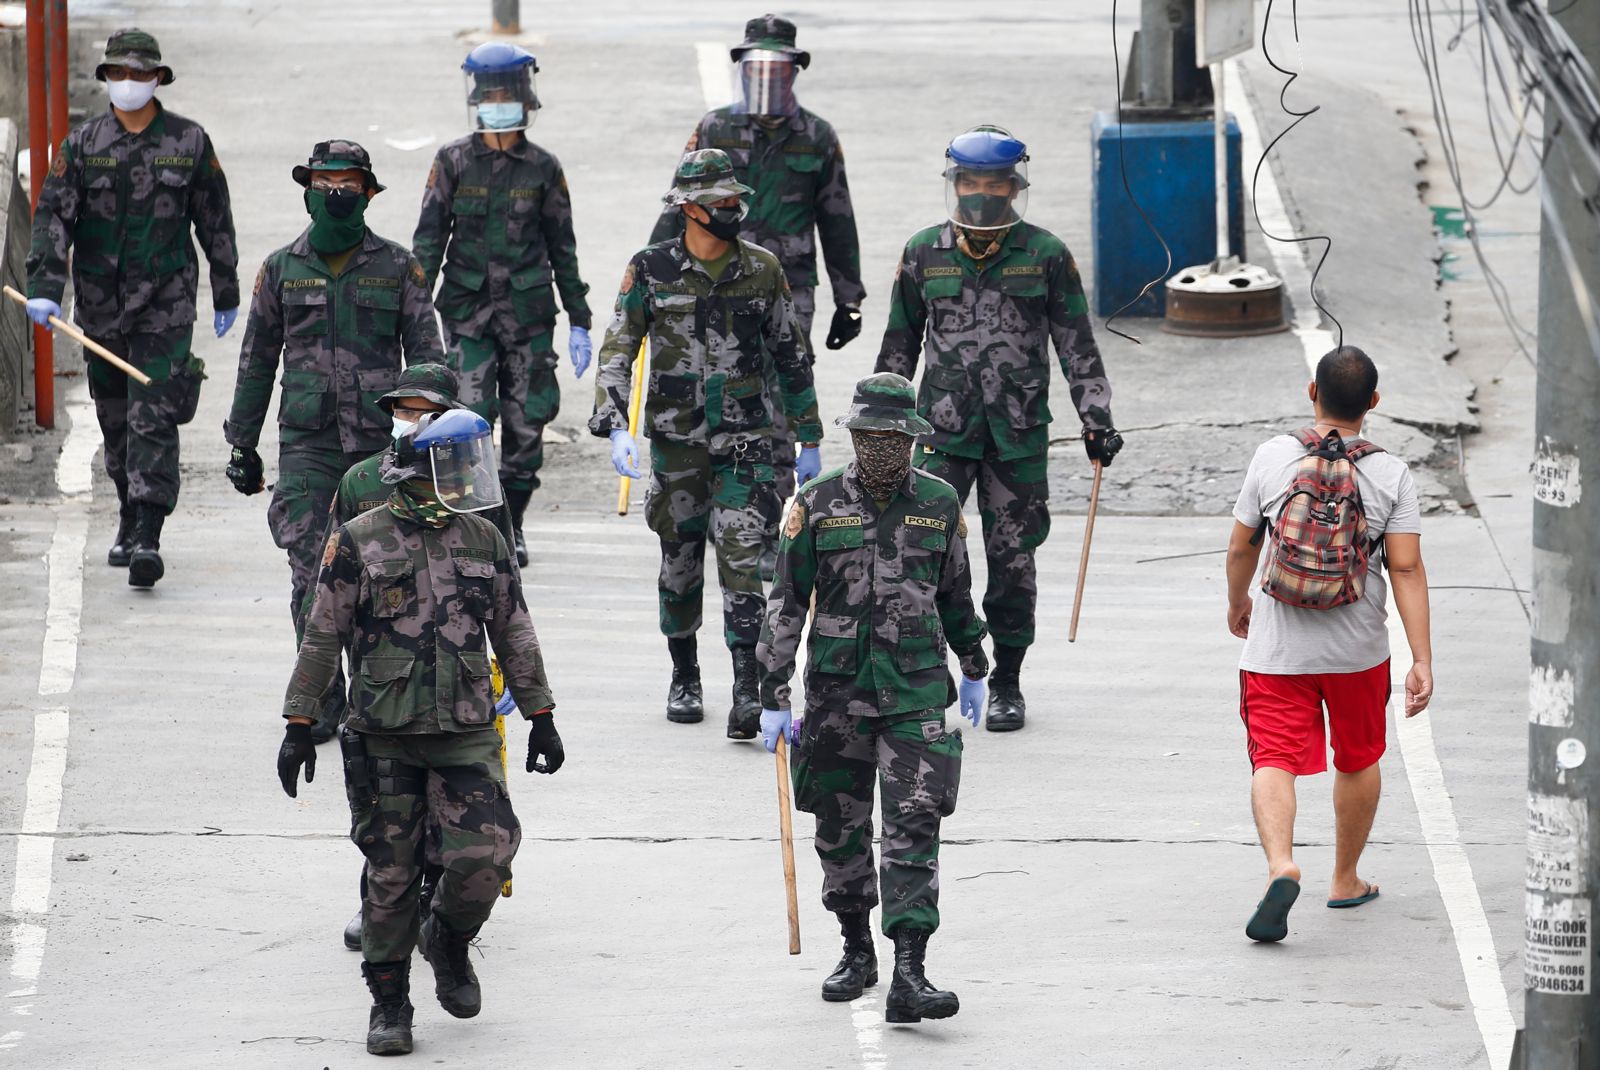 US foreign policy aggravates human rights abuses in the Philippines during COVID